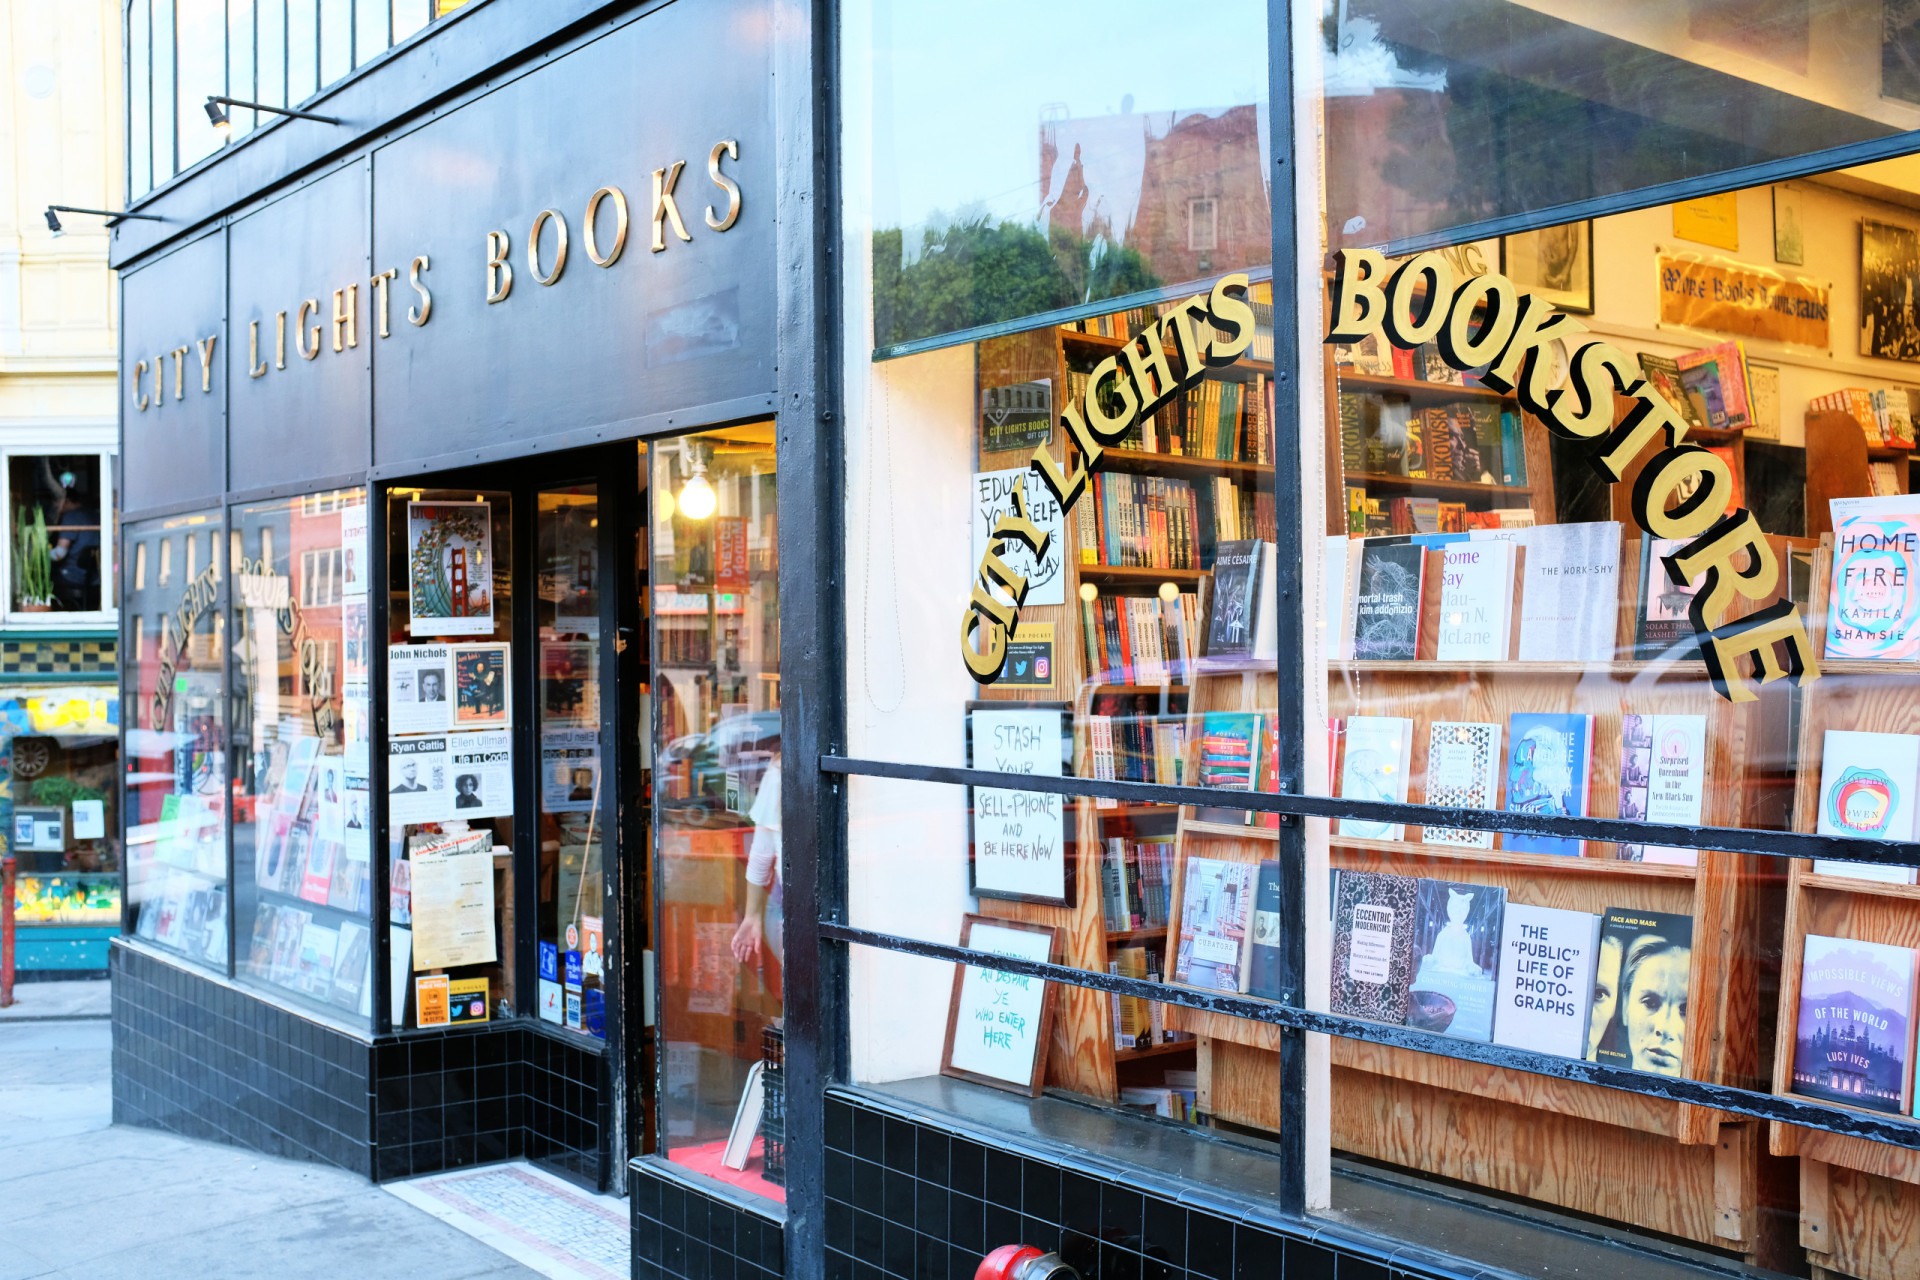 <p>Jack Kerouac's 'On the Road' epitomizes the Beat Generation's ethos, much of which is centered around San Francisco. The city's North Beach neighborhood, with landmarks like City Lights Bookstore and Vesuvio Café, continues to be a haven for those inspired by Kerouac.</p><p><a href="https://www.msn.com/en-us/community/channel/vid-7xx8mnucu55yw63we9va2gwr7uihbxwc68fxqp25x6tg4ftibpra?cvid=94631541bc0f4f89bfd59158d696ad7e">Follow us and access great exclusive content every day</a></p>